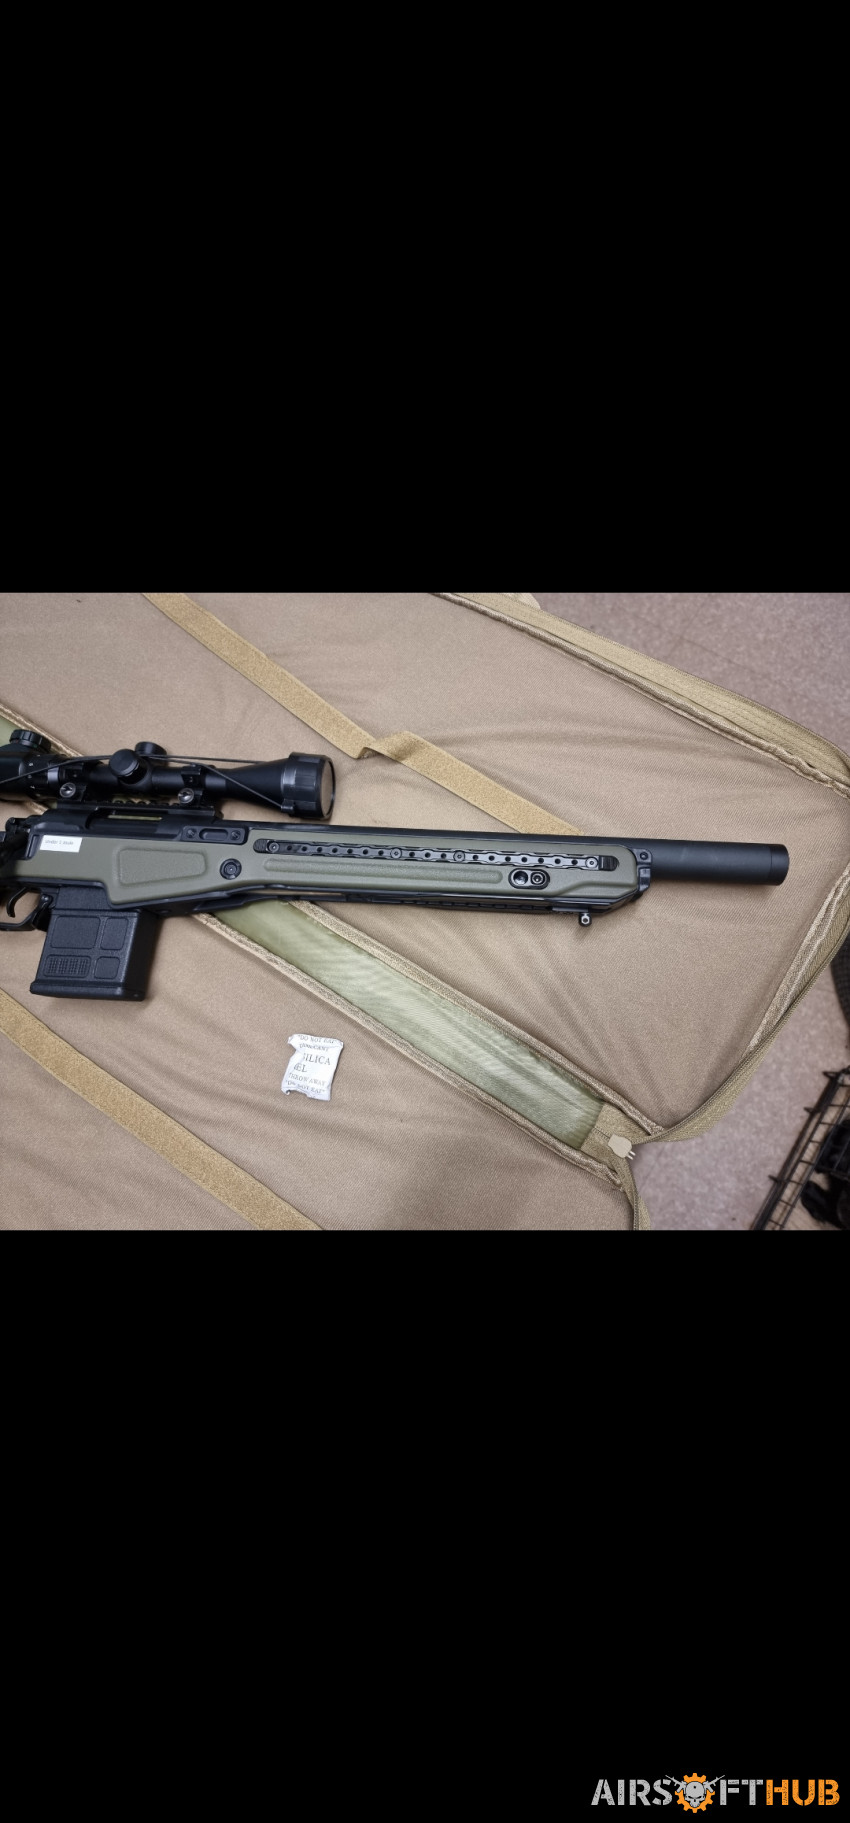 Aac t10 sniper - Used airsoft equipment